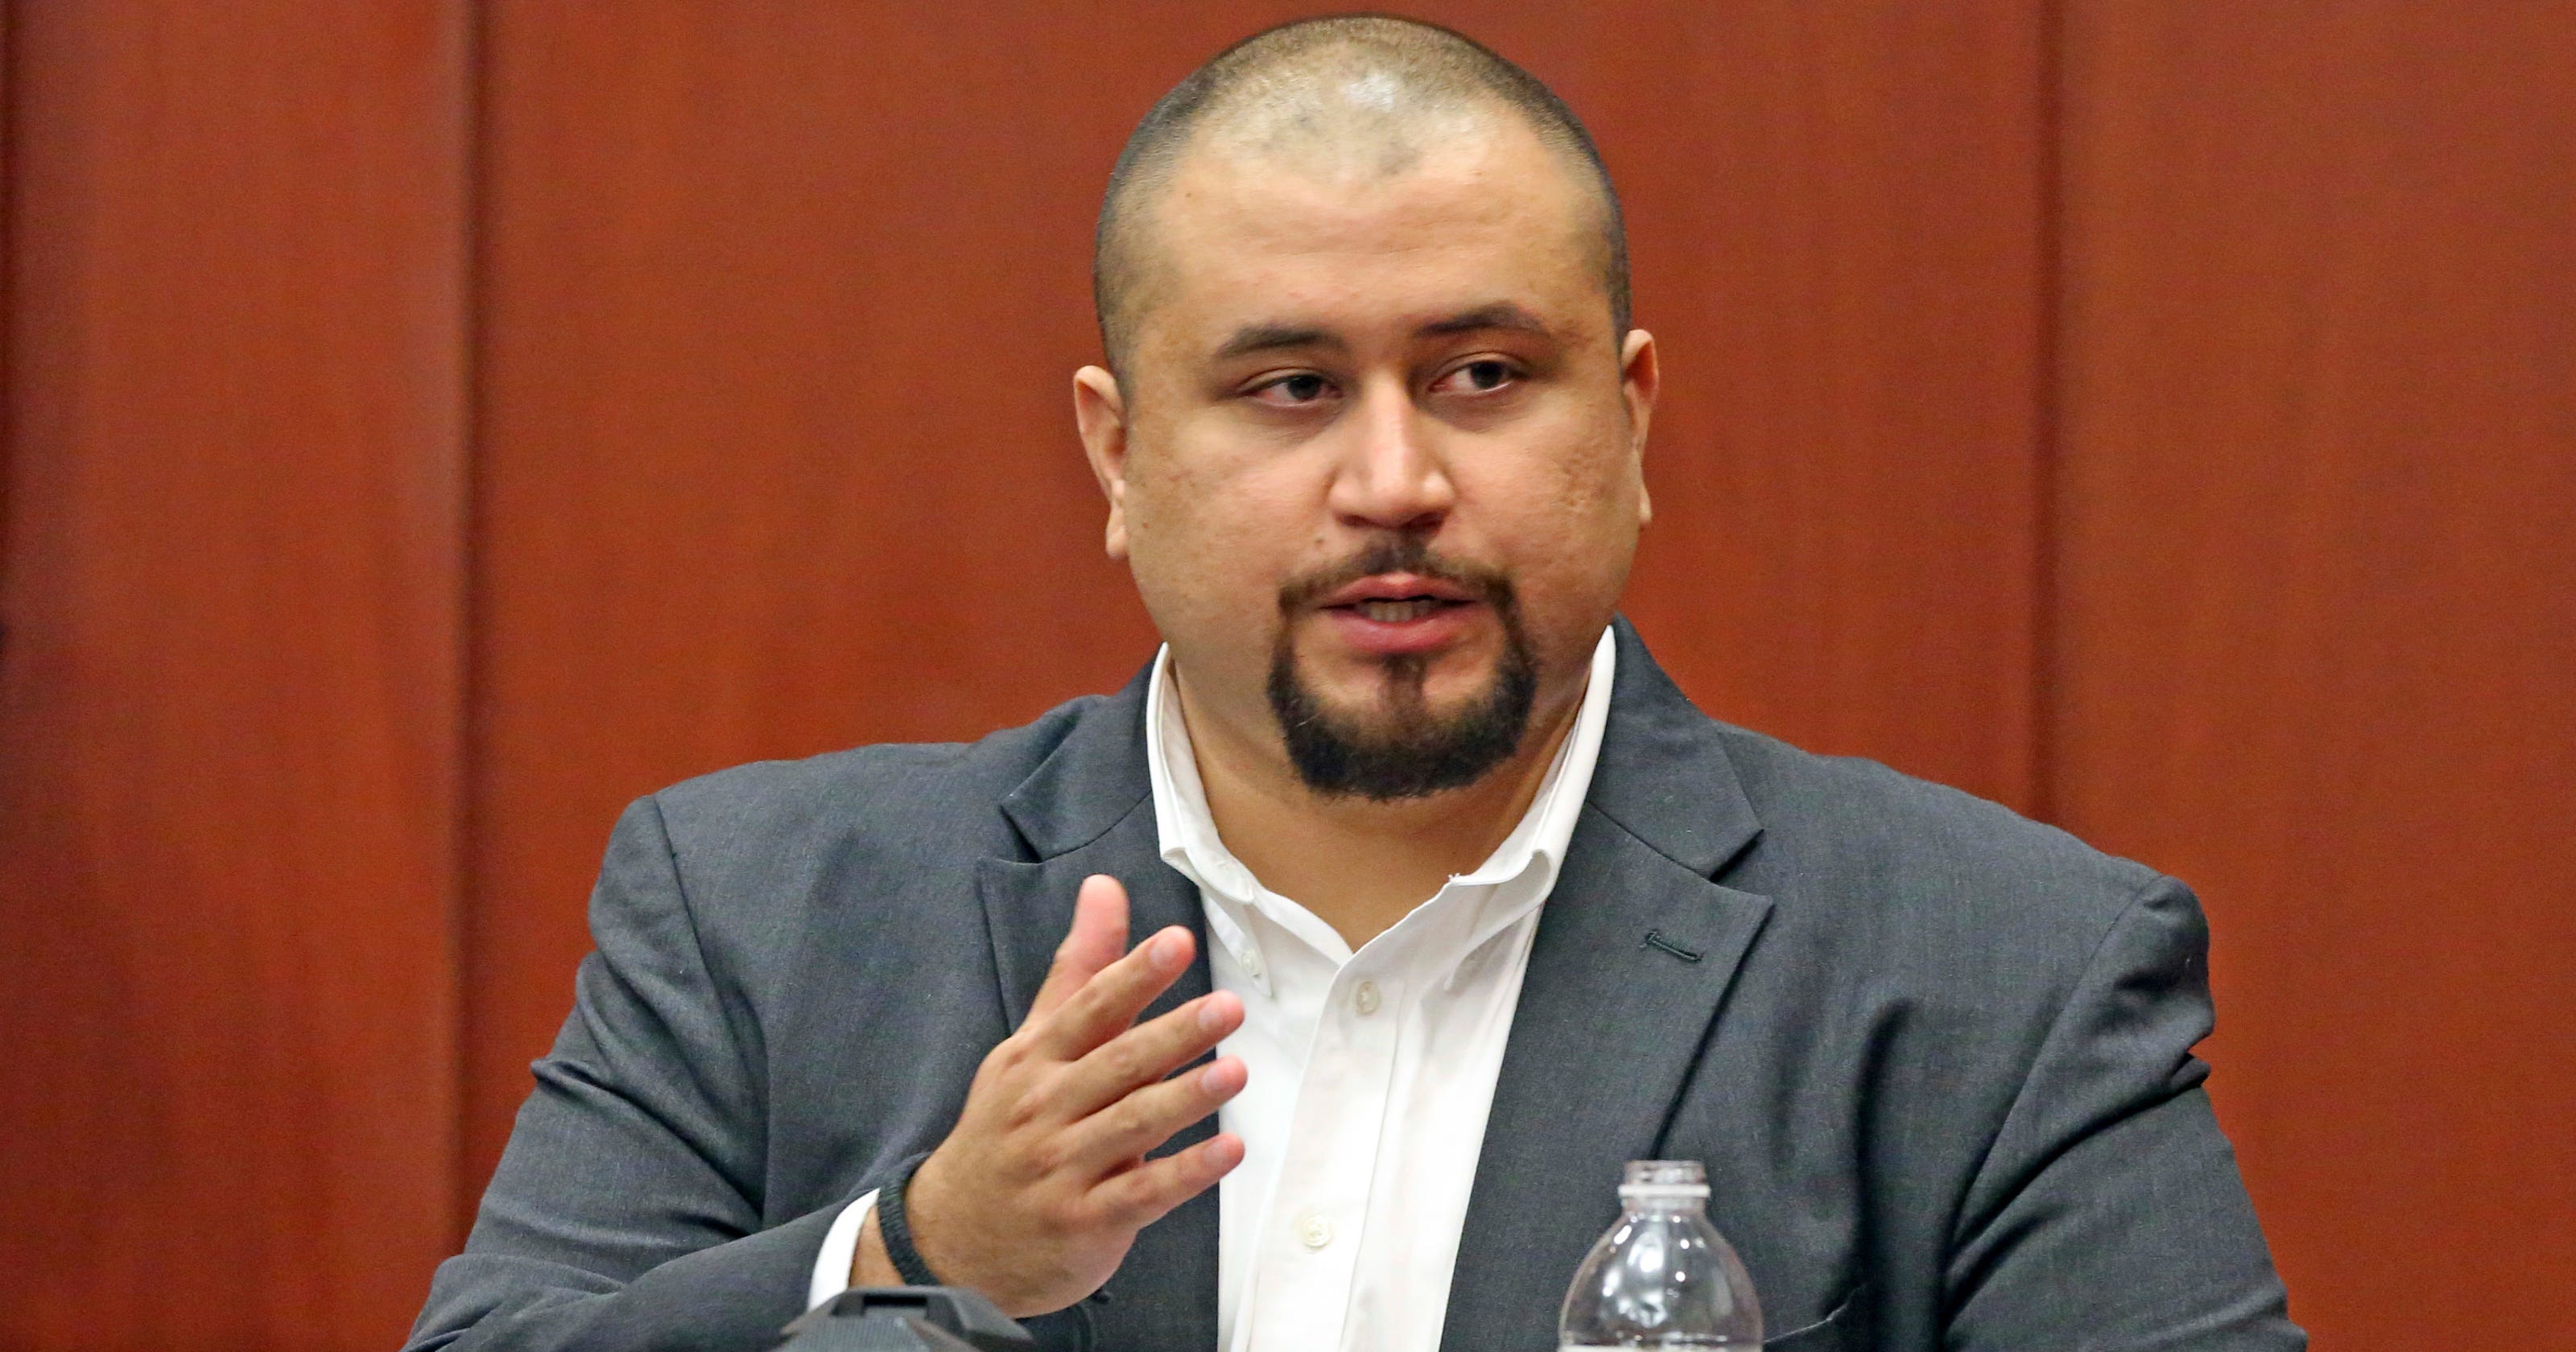 George Zimmerman pleads no contest in stalking case linked to Jay Z3200 x 1680